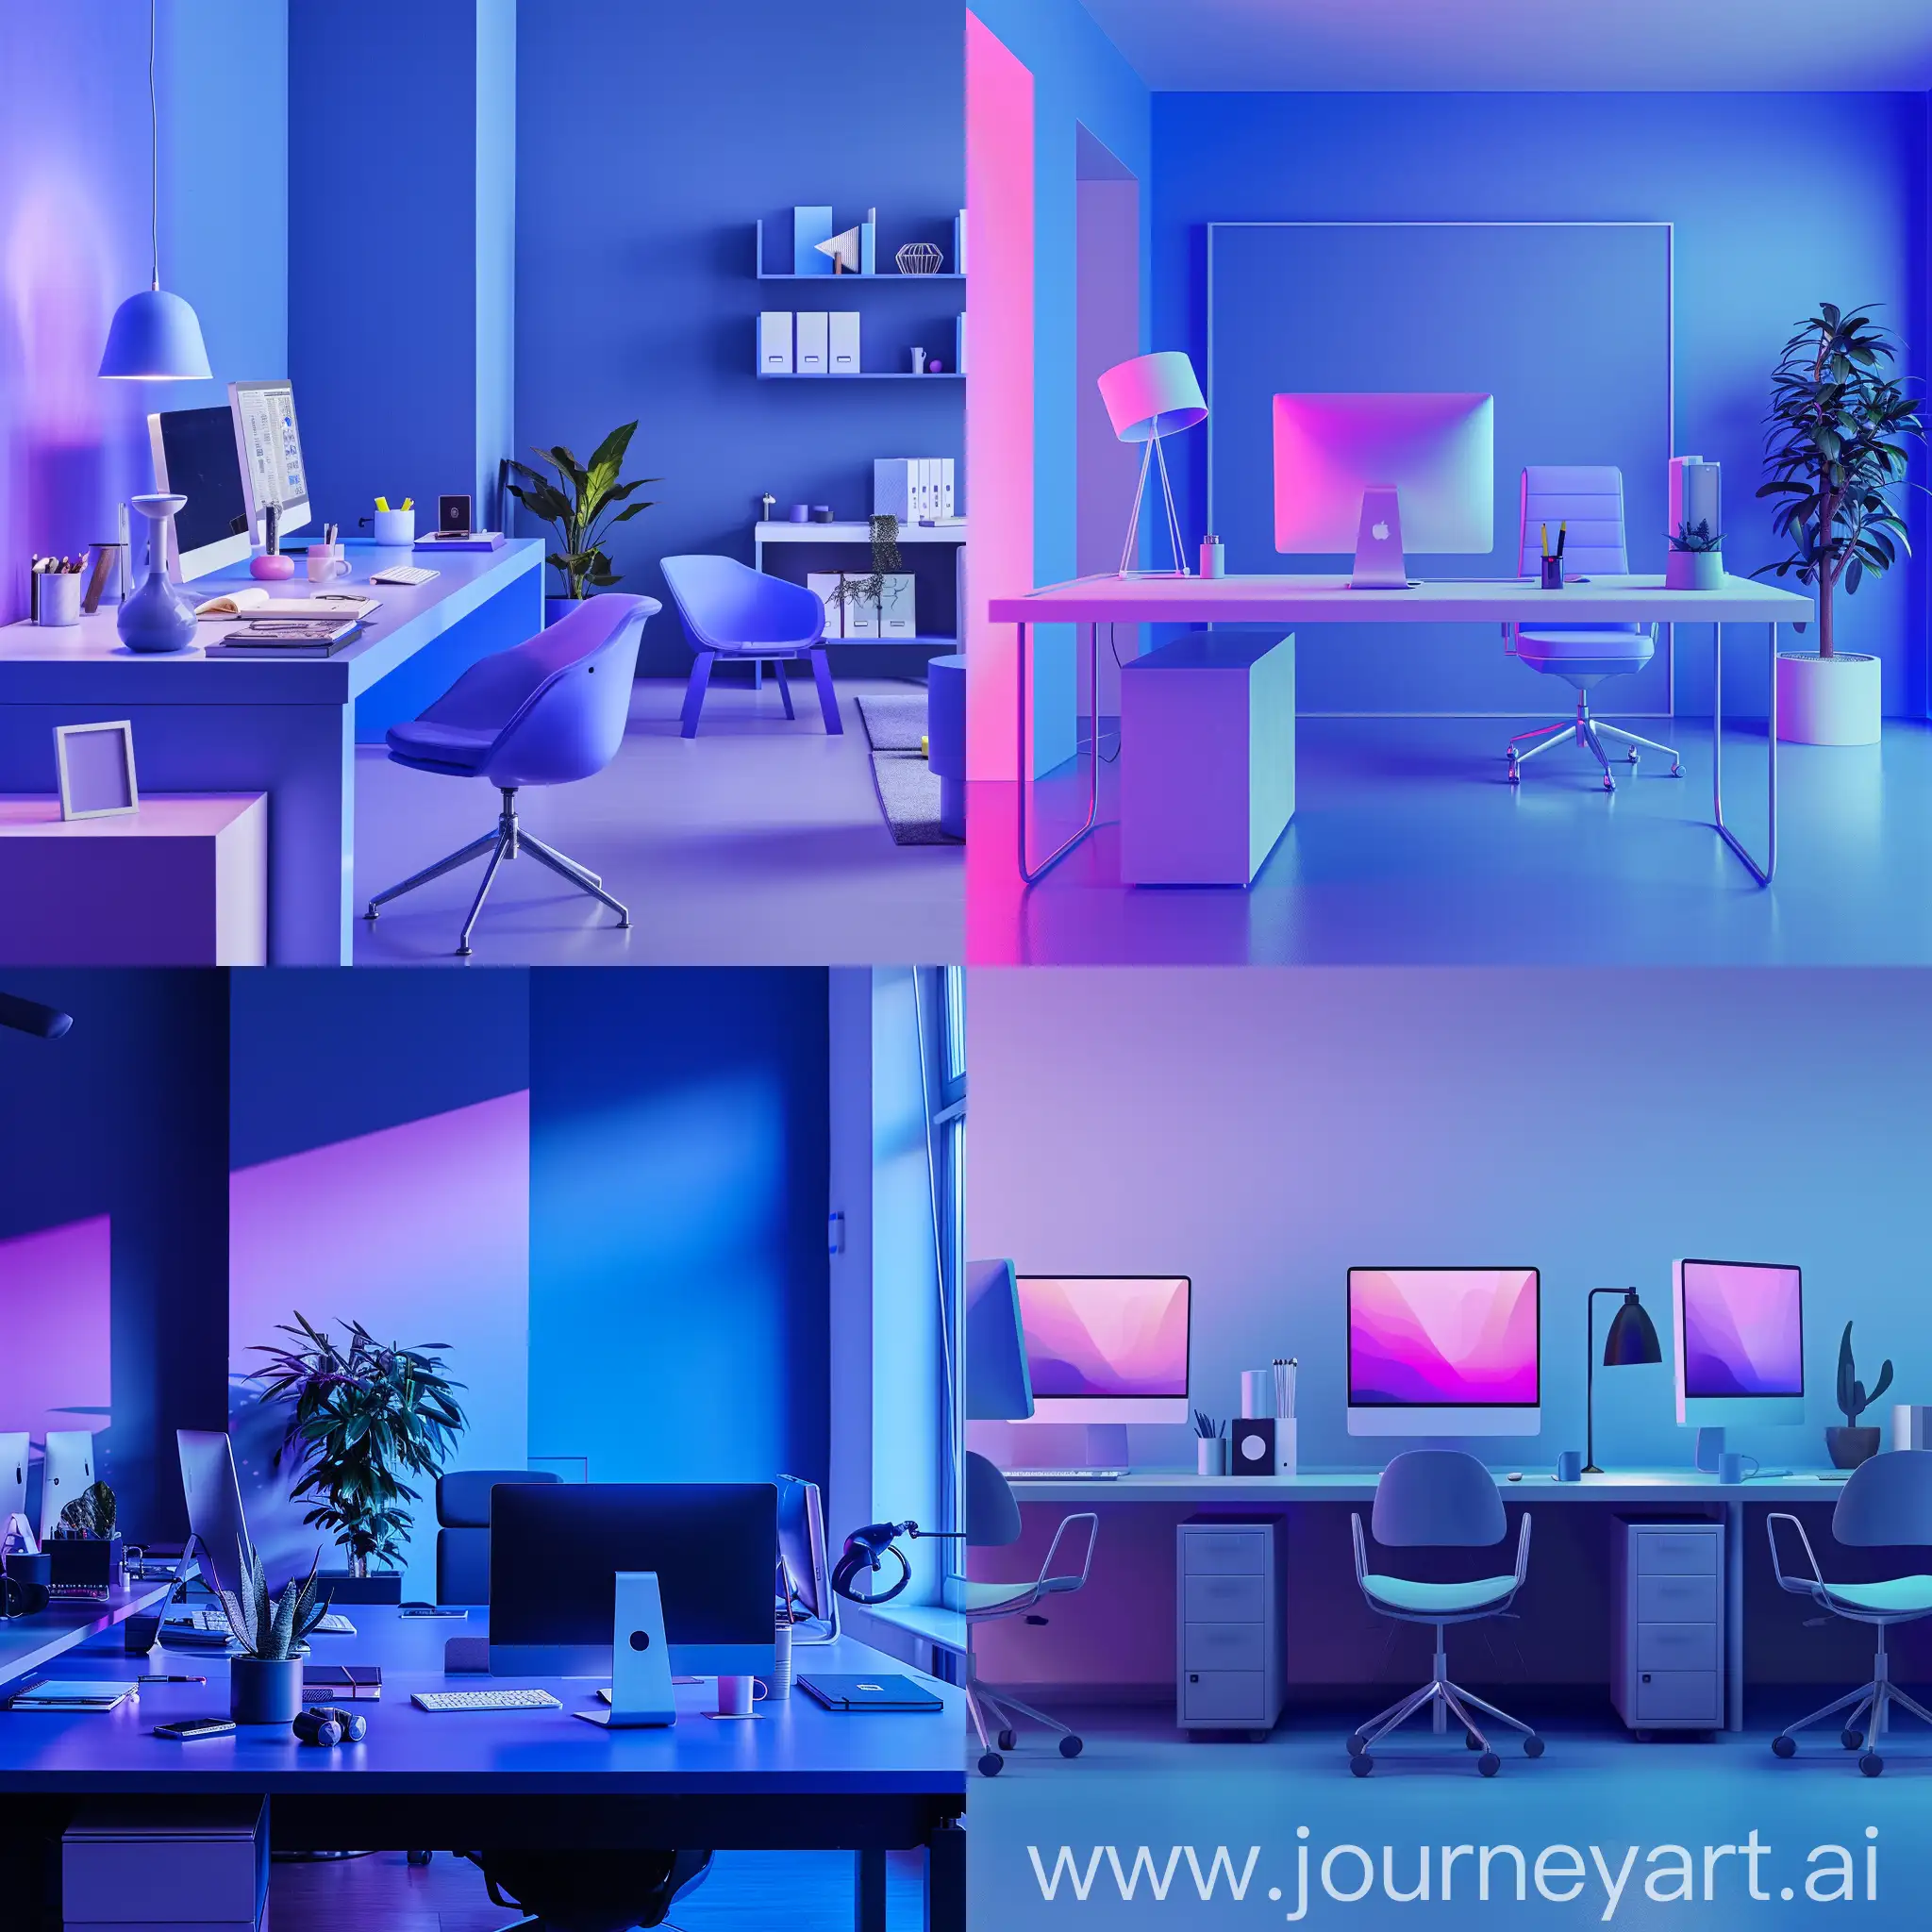 Empty-Graphic-Designers-Office-in-Tranquil-Blue-and-Purple-Tones